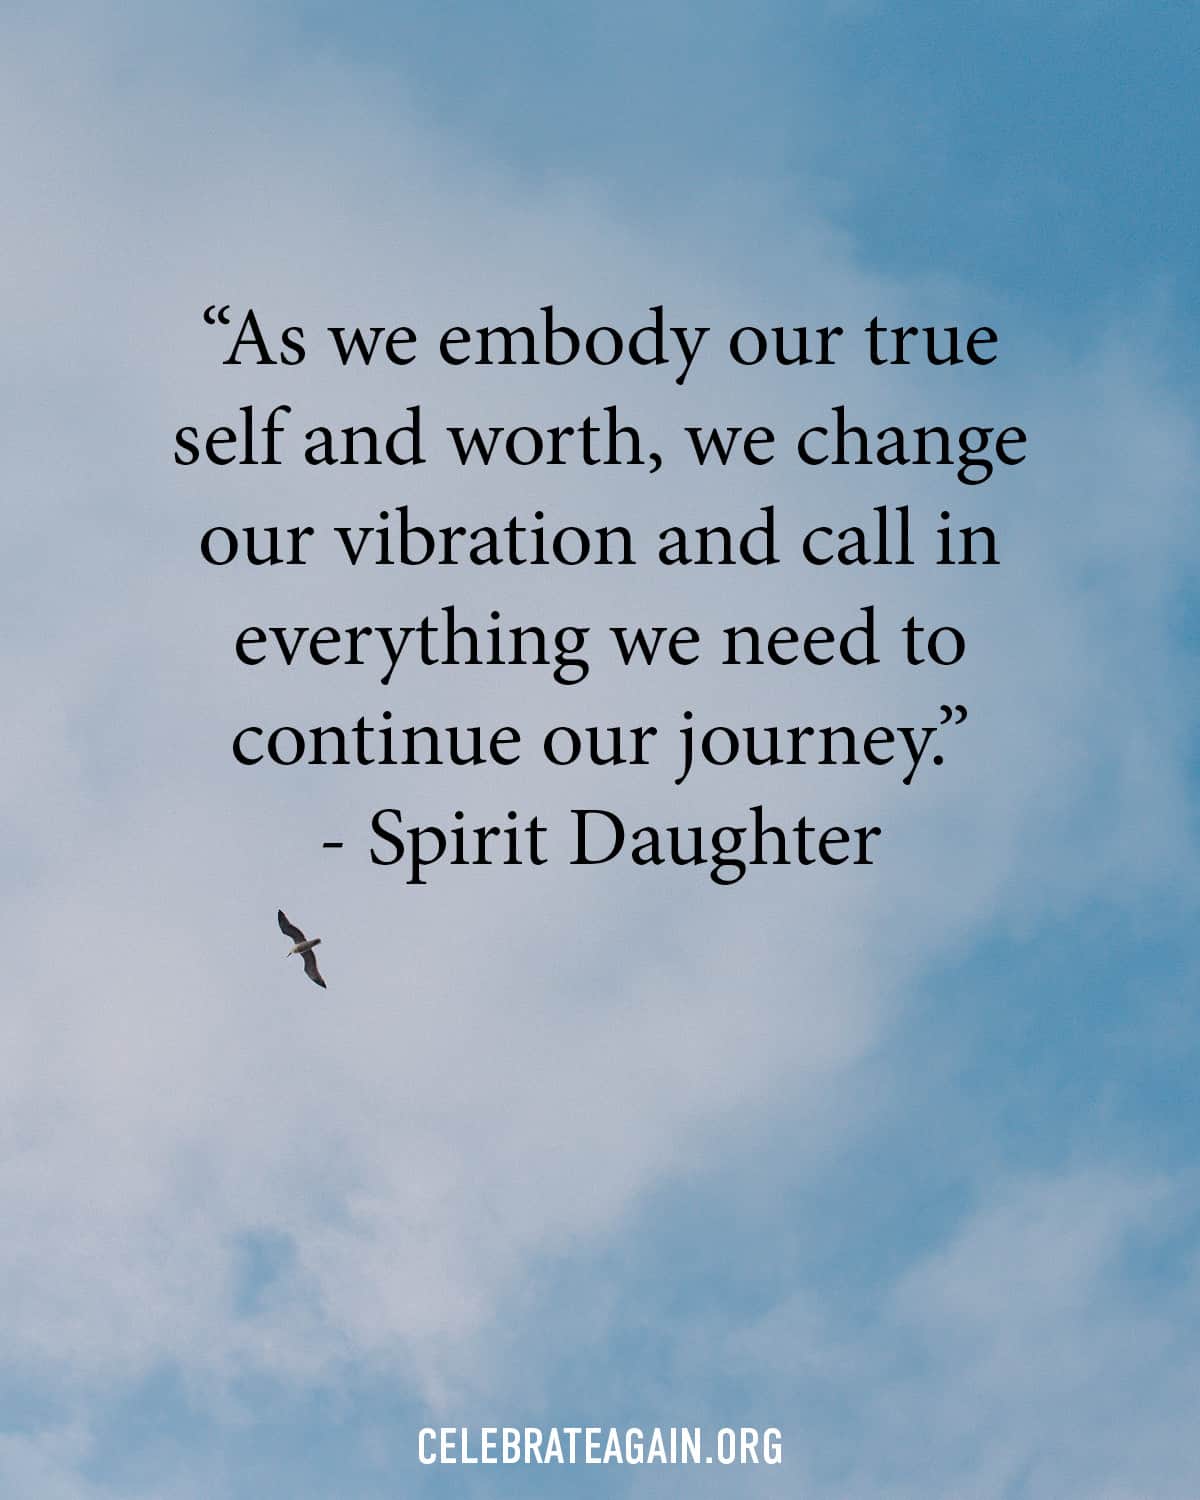 a self love quote saying “As we embody our true self and worth, we change our vibration and call in everything we need to continue our journey.” Spirit Daughter over a sky photo with one bird flying